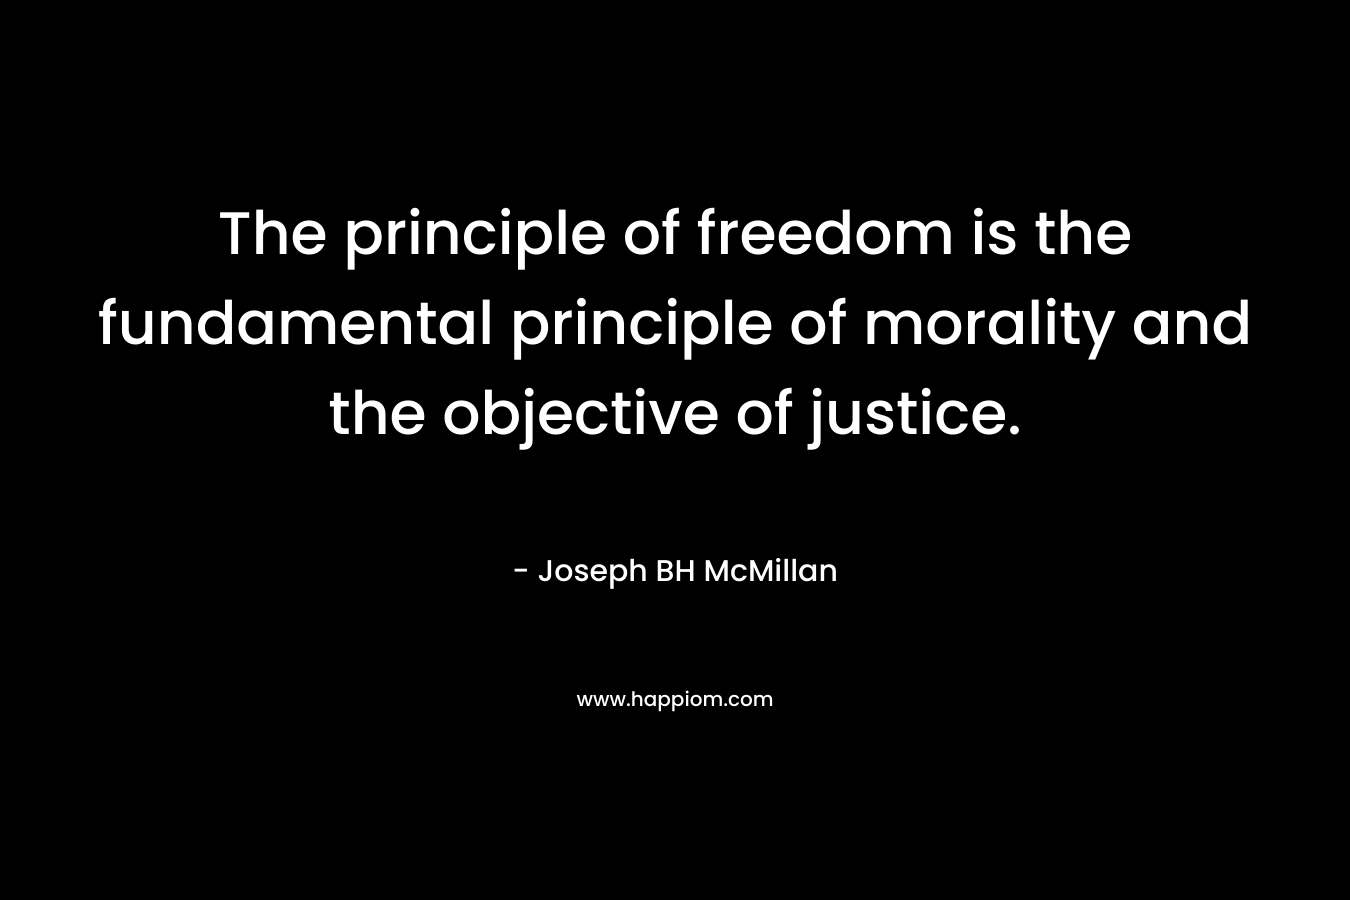 The principle of freedom is the fundamental principle of morality and the objective of justice.